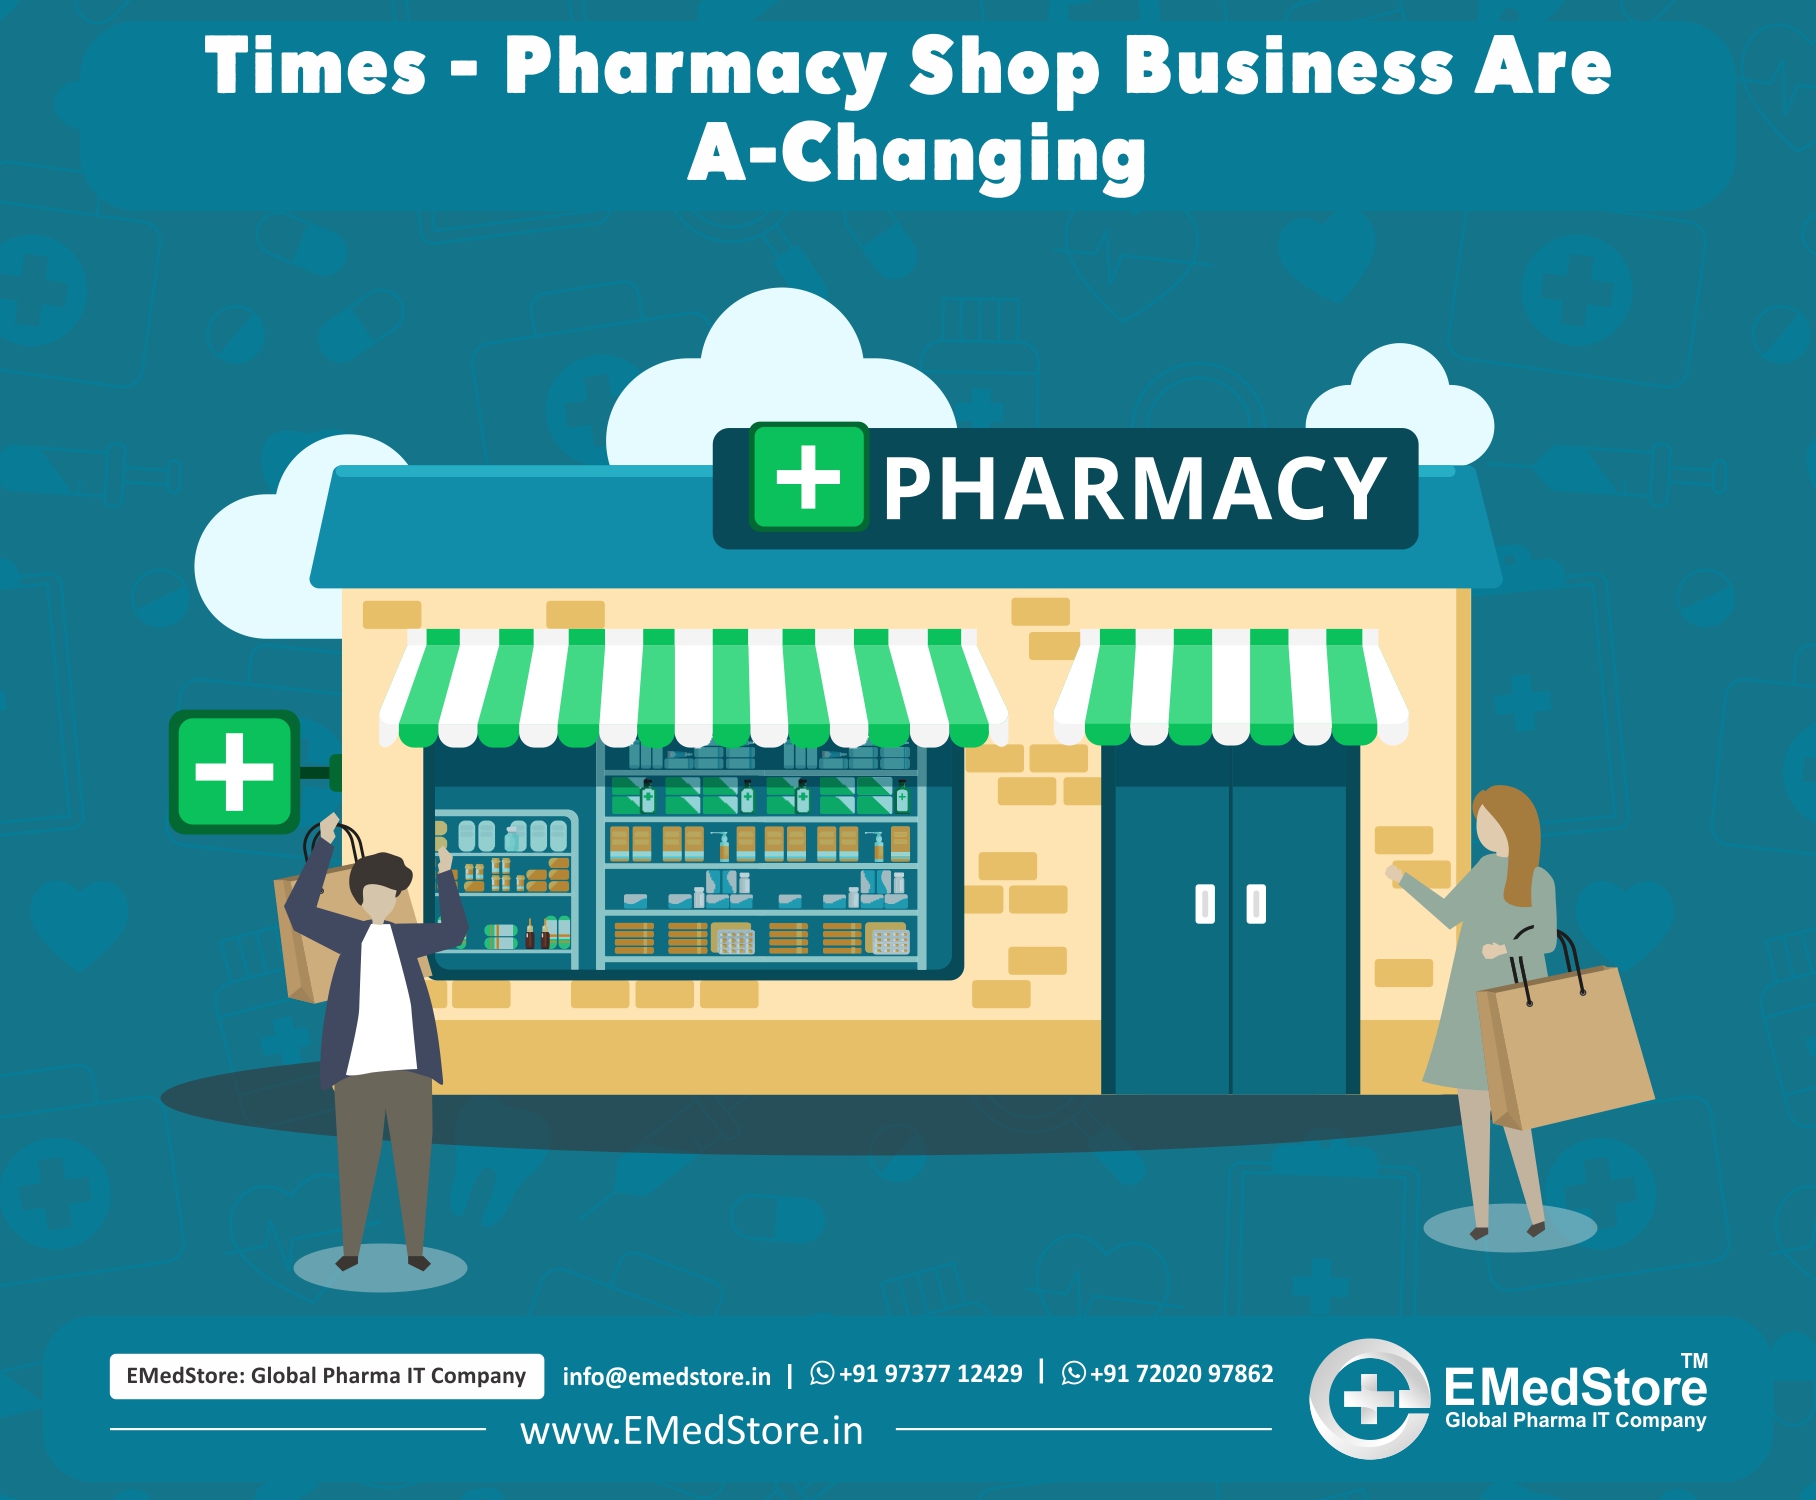 Times - Pharmacy Shop Business Are A-Changing 